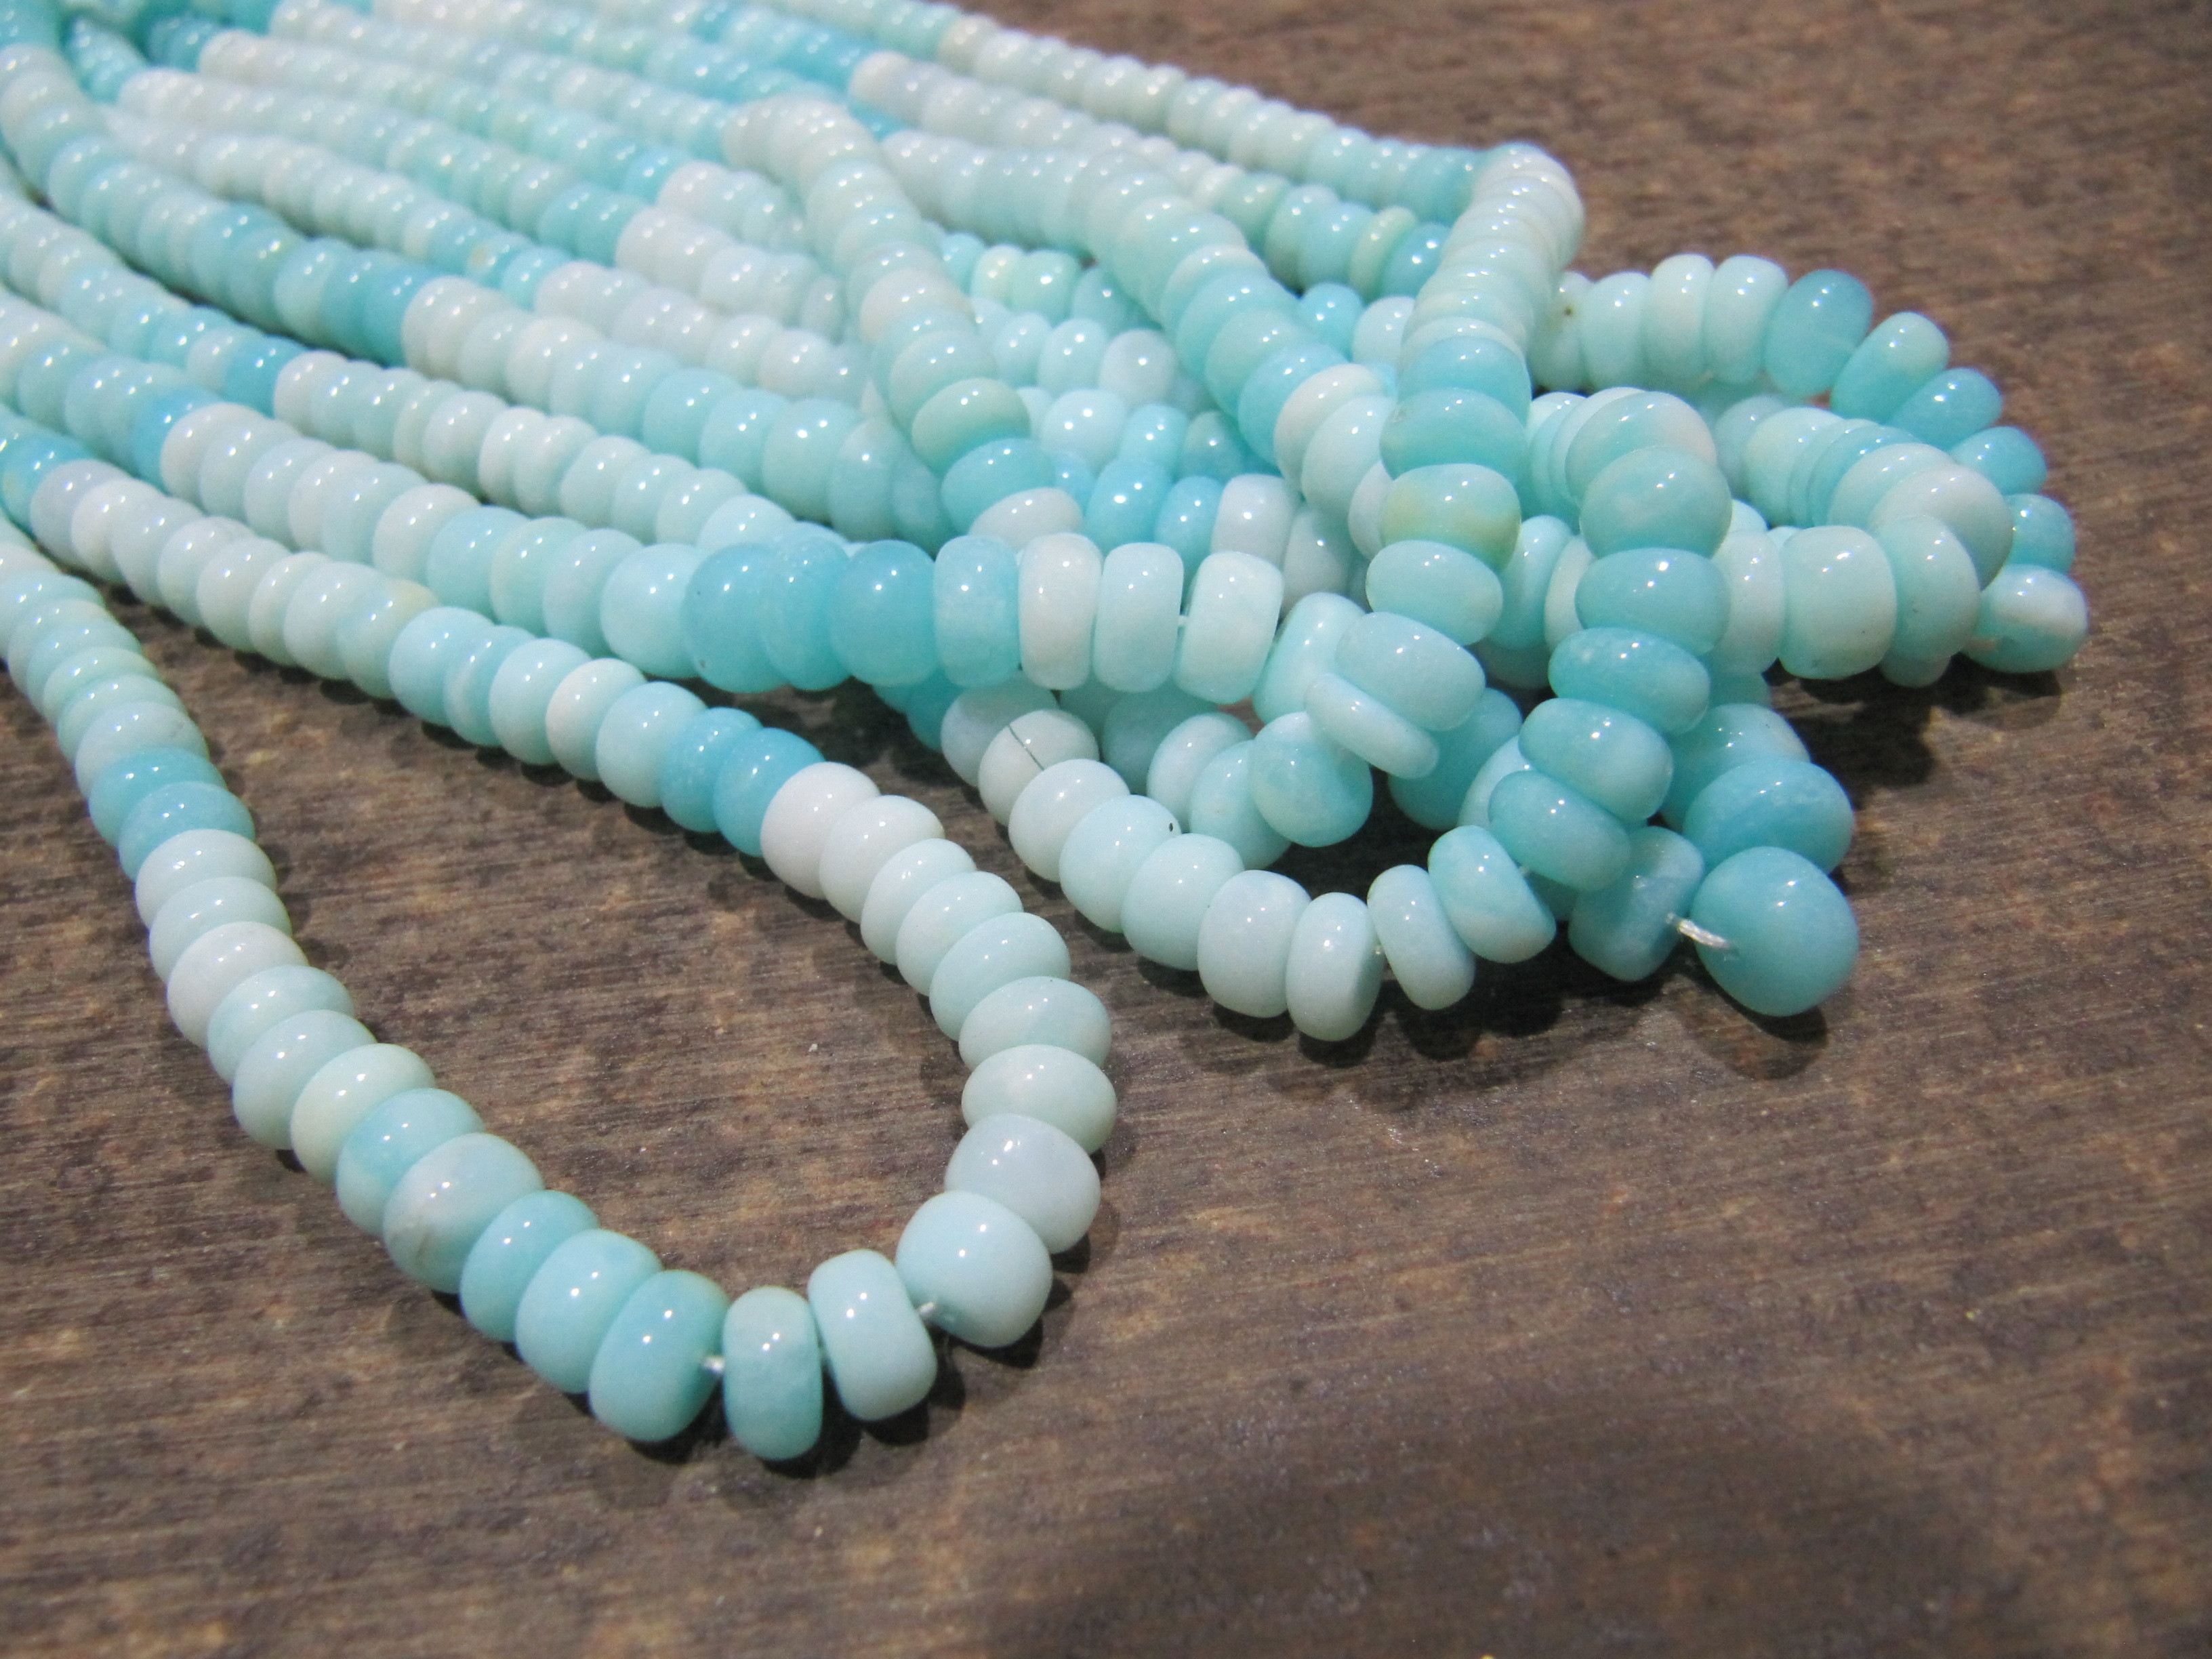 Natural Blue Peruvian Opal Rondelle Plain Smooth Beads 5-6mm Strand 8 Inches